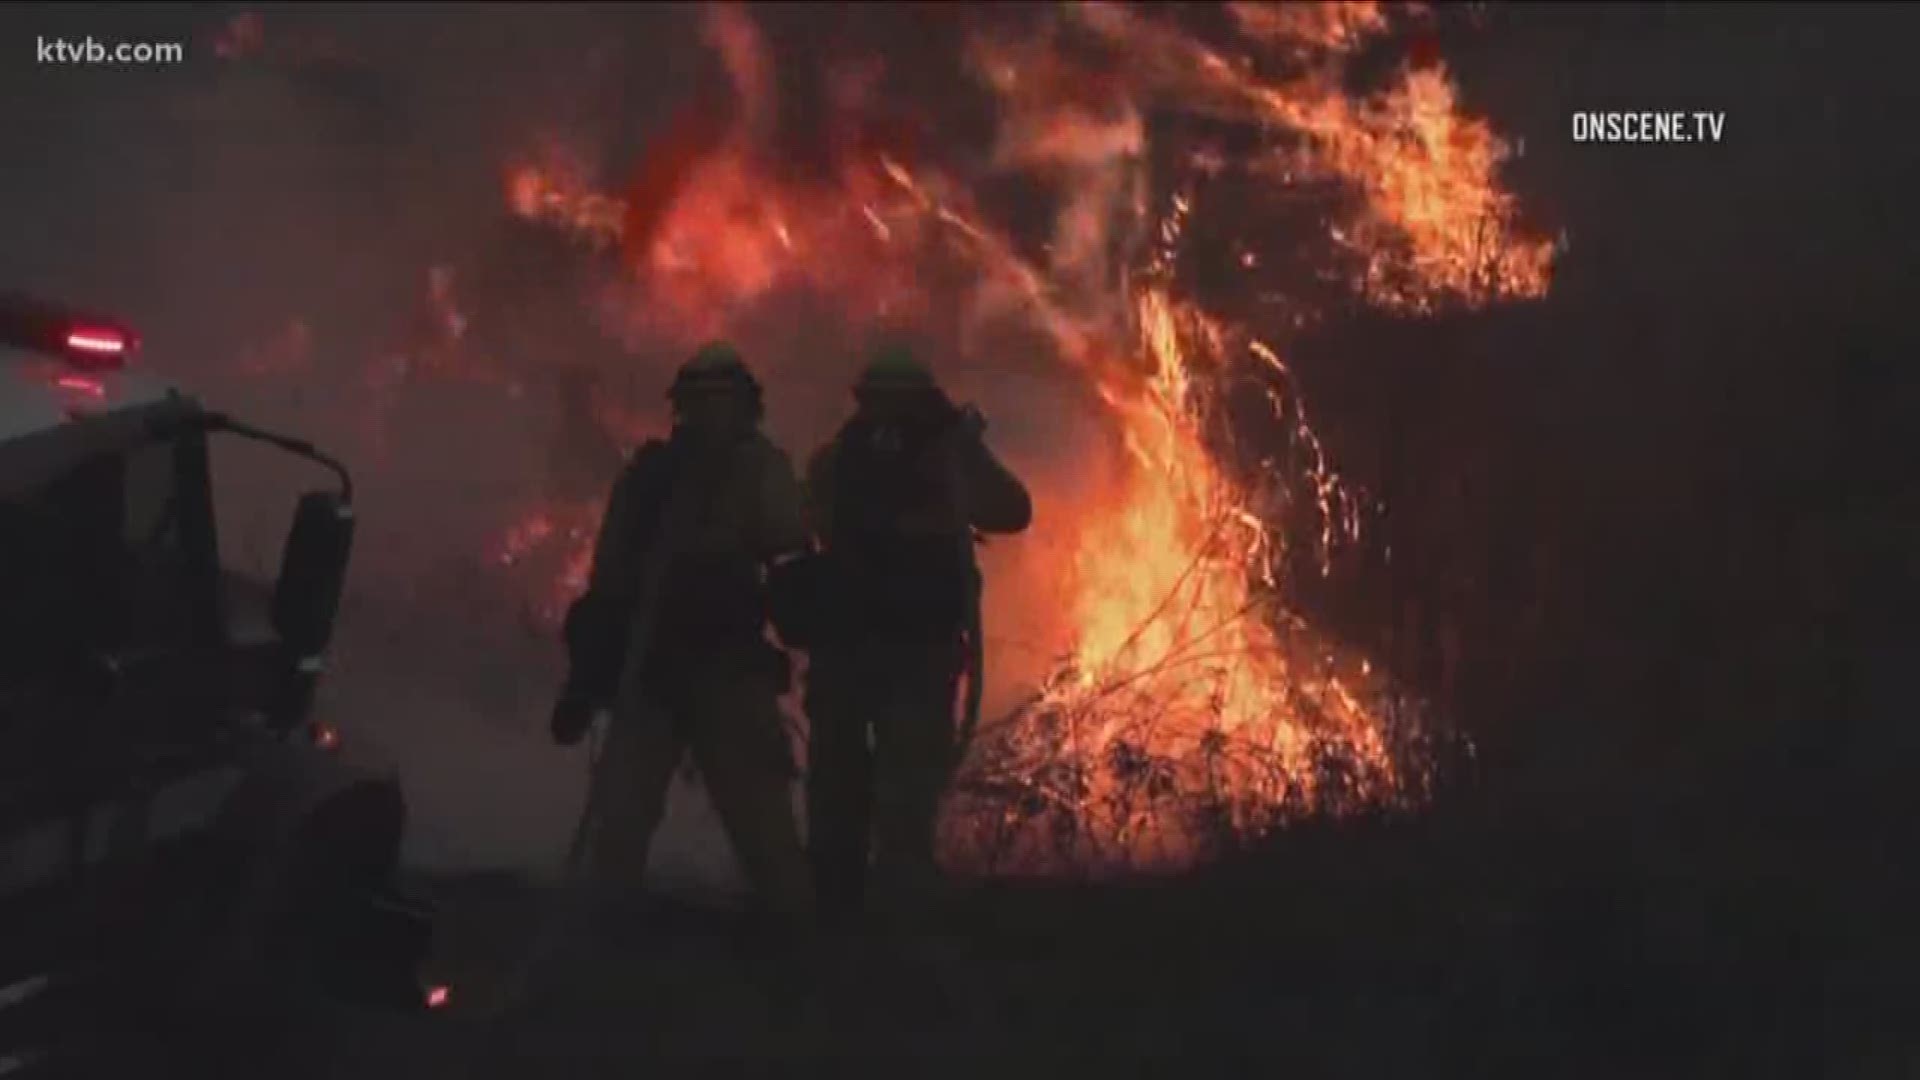 Several firefighters from the Treasure Valley are among those helping to fight several destructive wildfires burning in California.